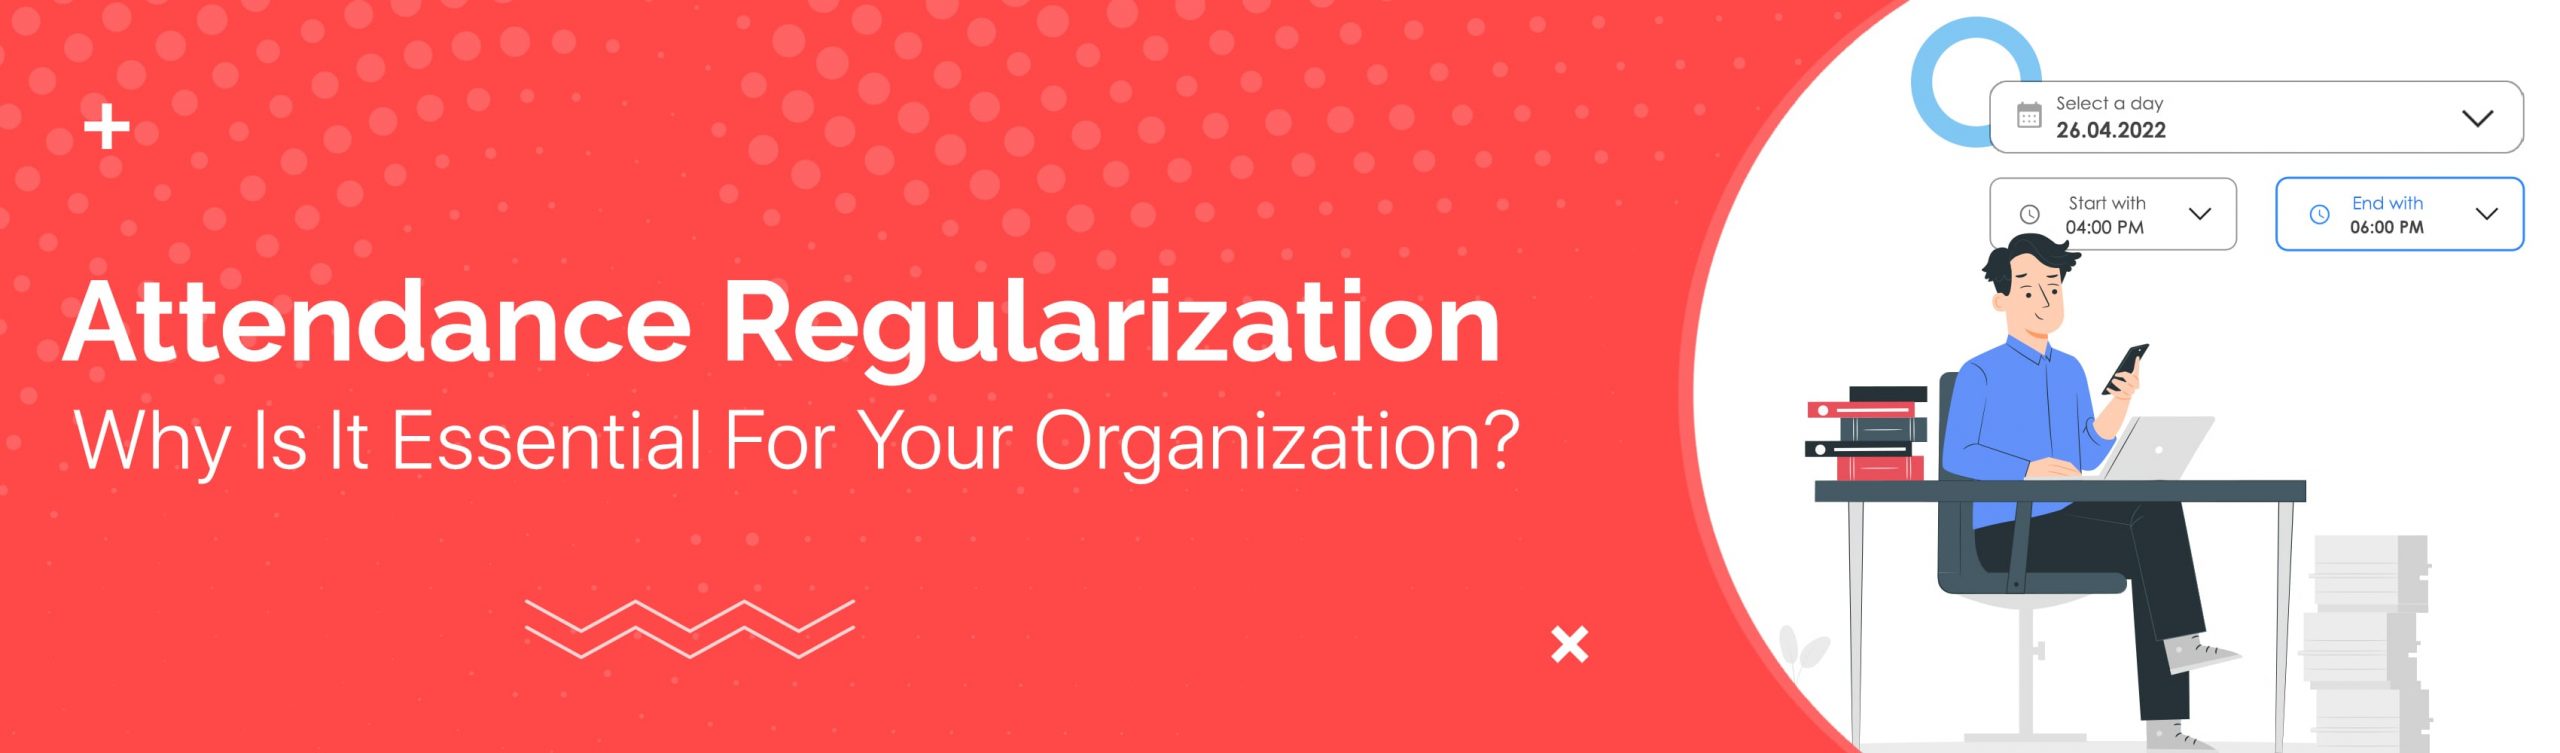 Attendance Regularization: Why Is It Essential For Your Organization?